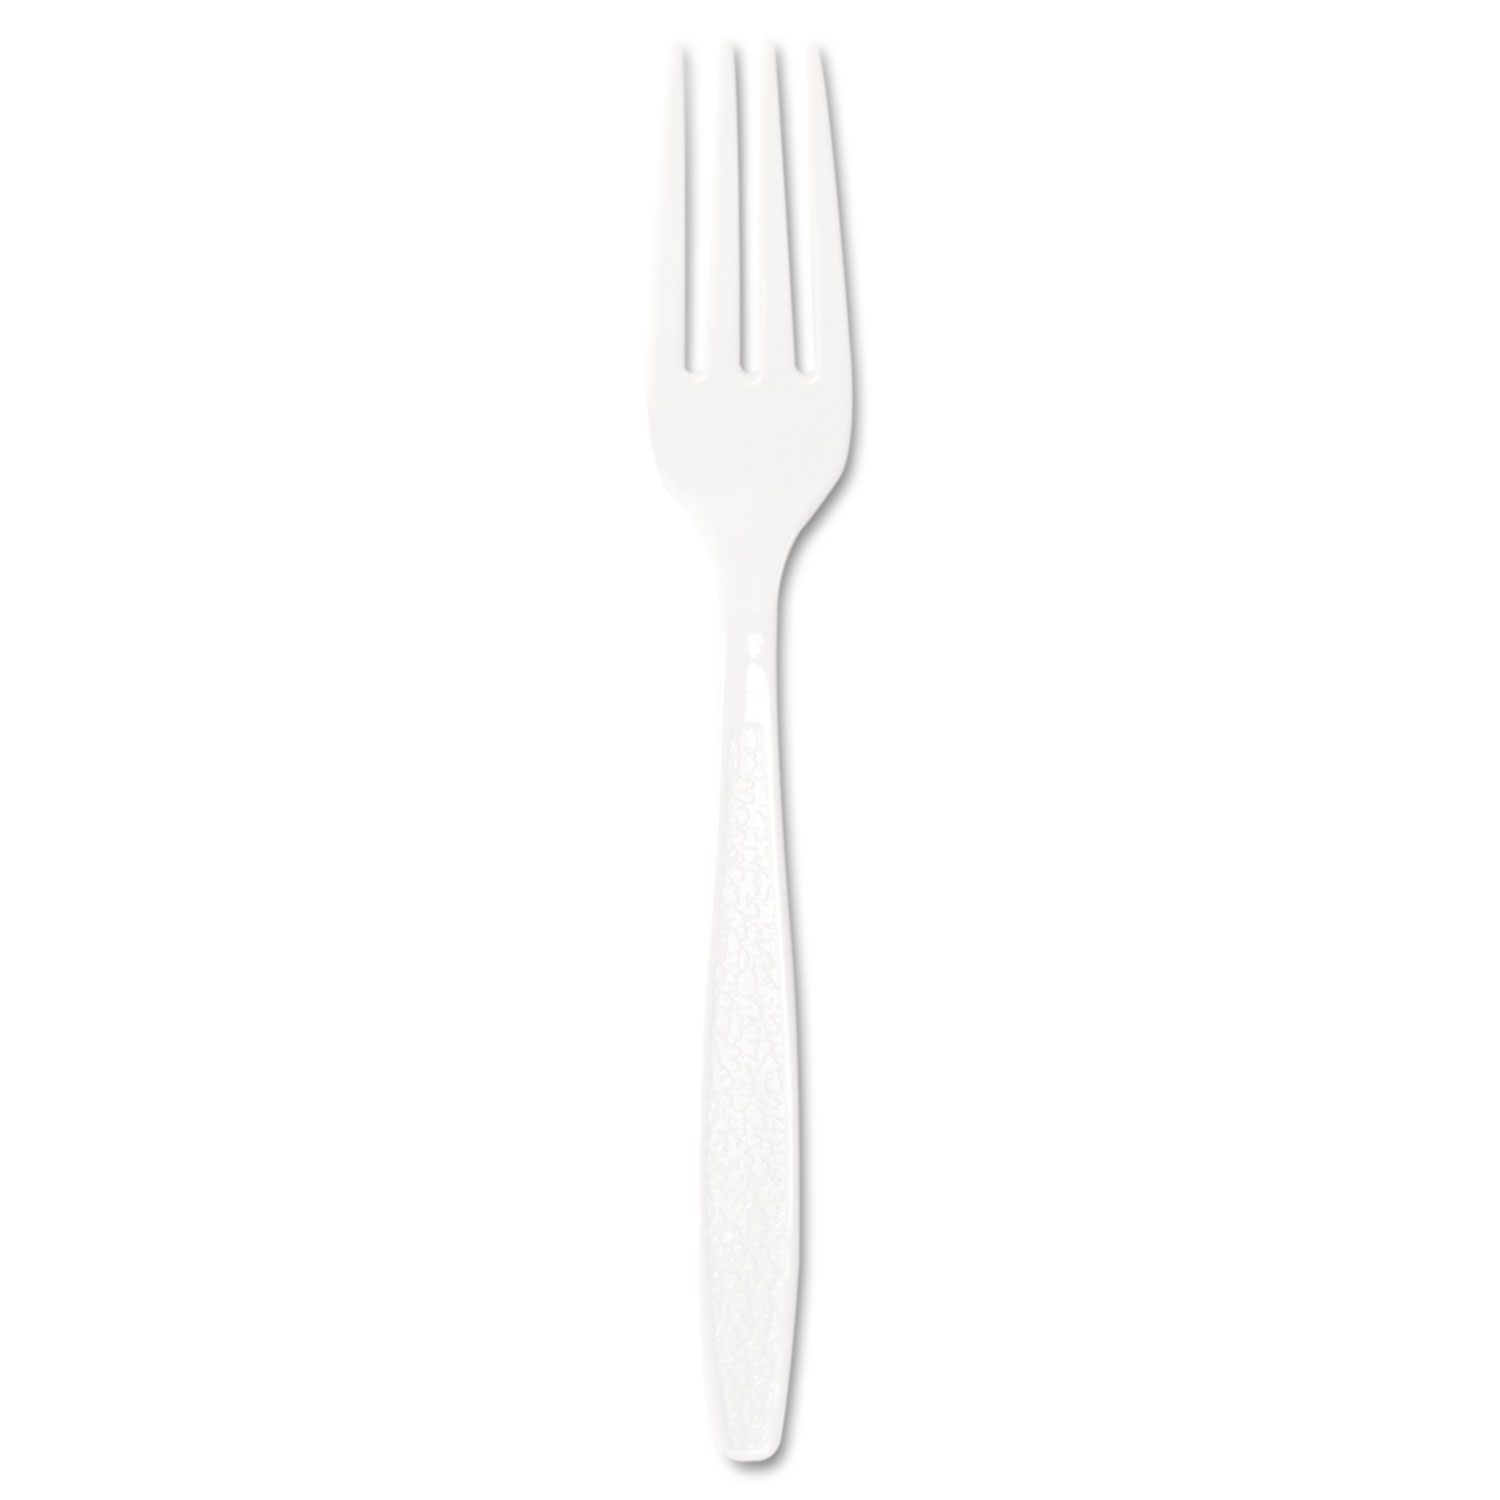  Dart GBX5FW-0007 Guildware Heavyweight Plastic Forks, White, 100/Box, 10 Boxes/Carton (SCCGBX5FW) 